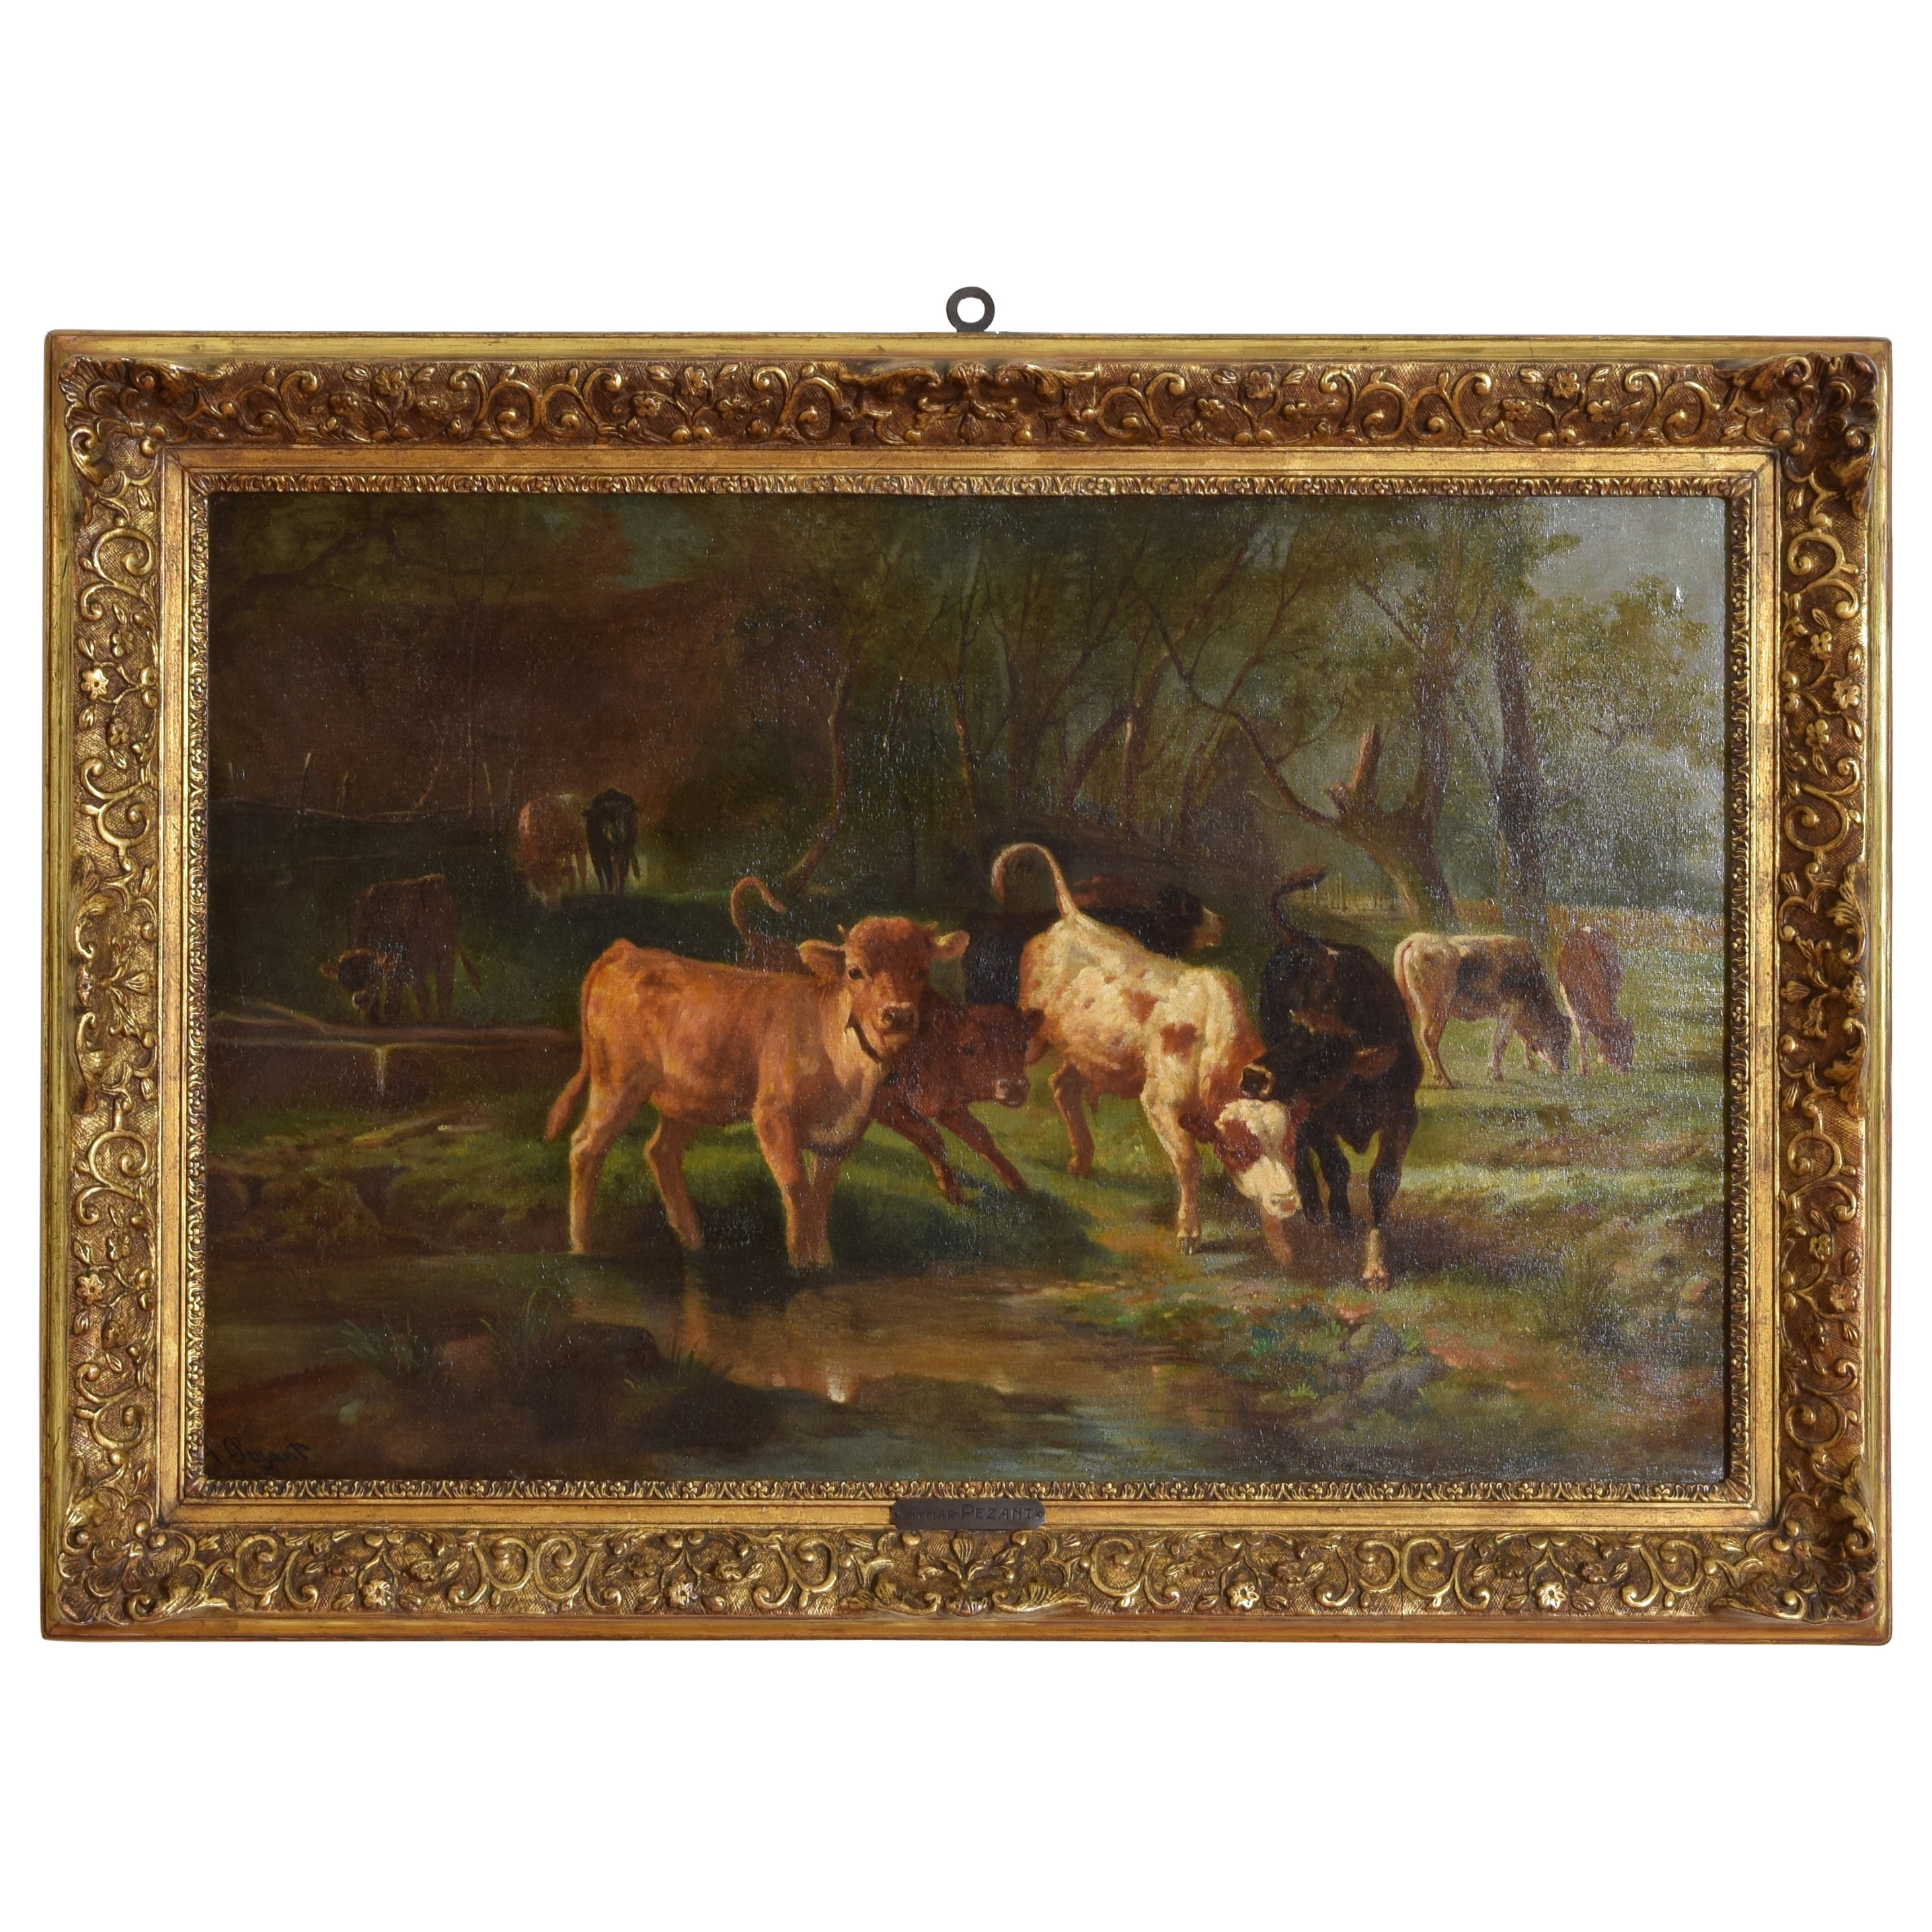 Oil on Canvas, “Cows Watering at Stream, Aymar Pezant, 1846-1916 For Sale